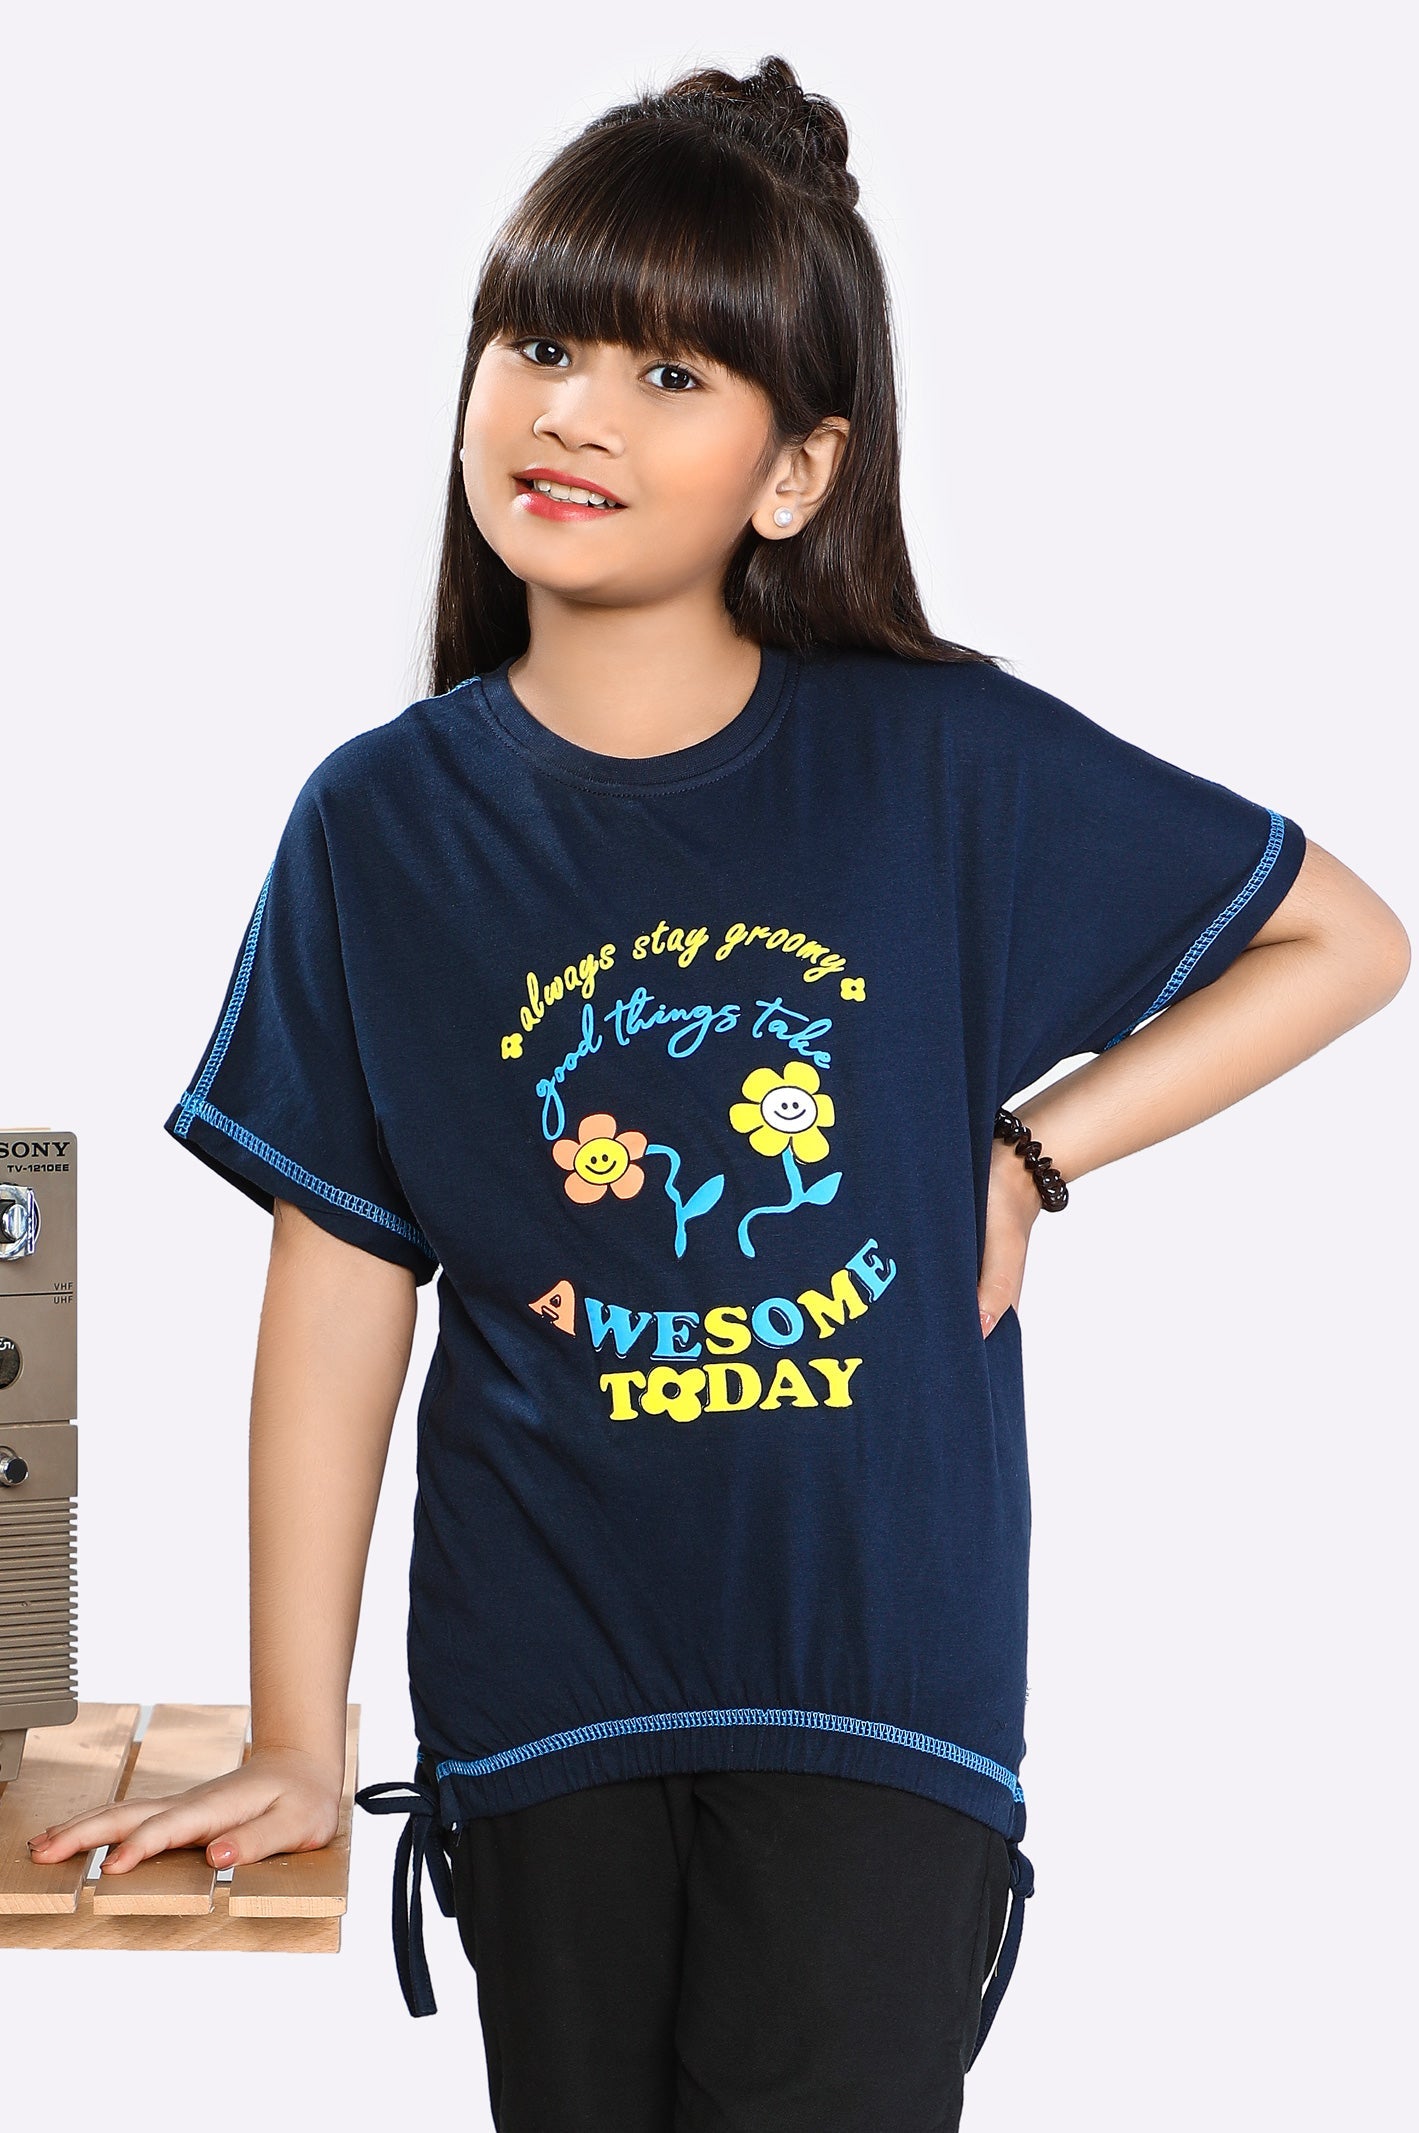 Girls T-Shirt From Diners